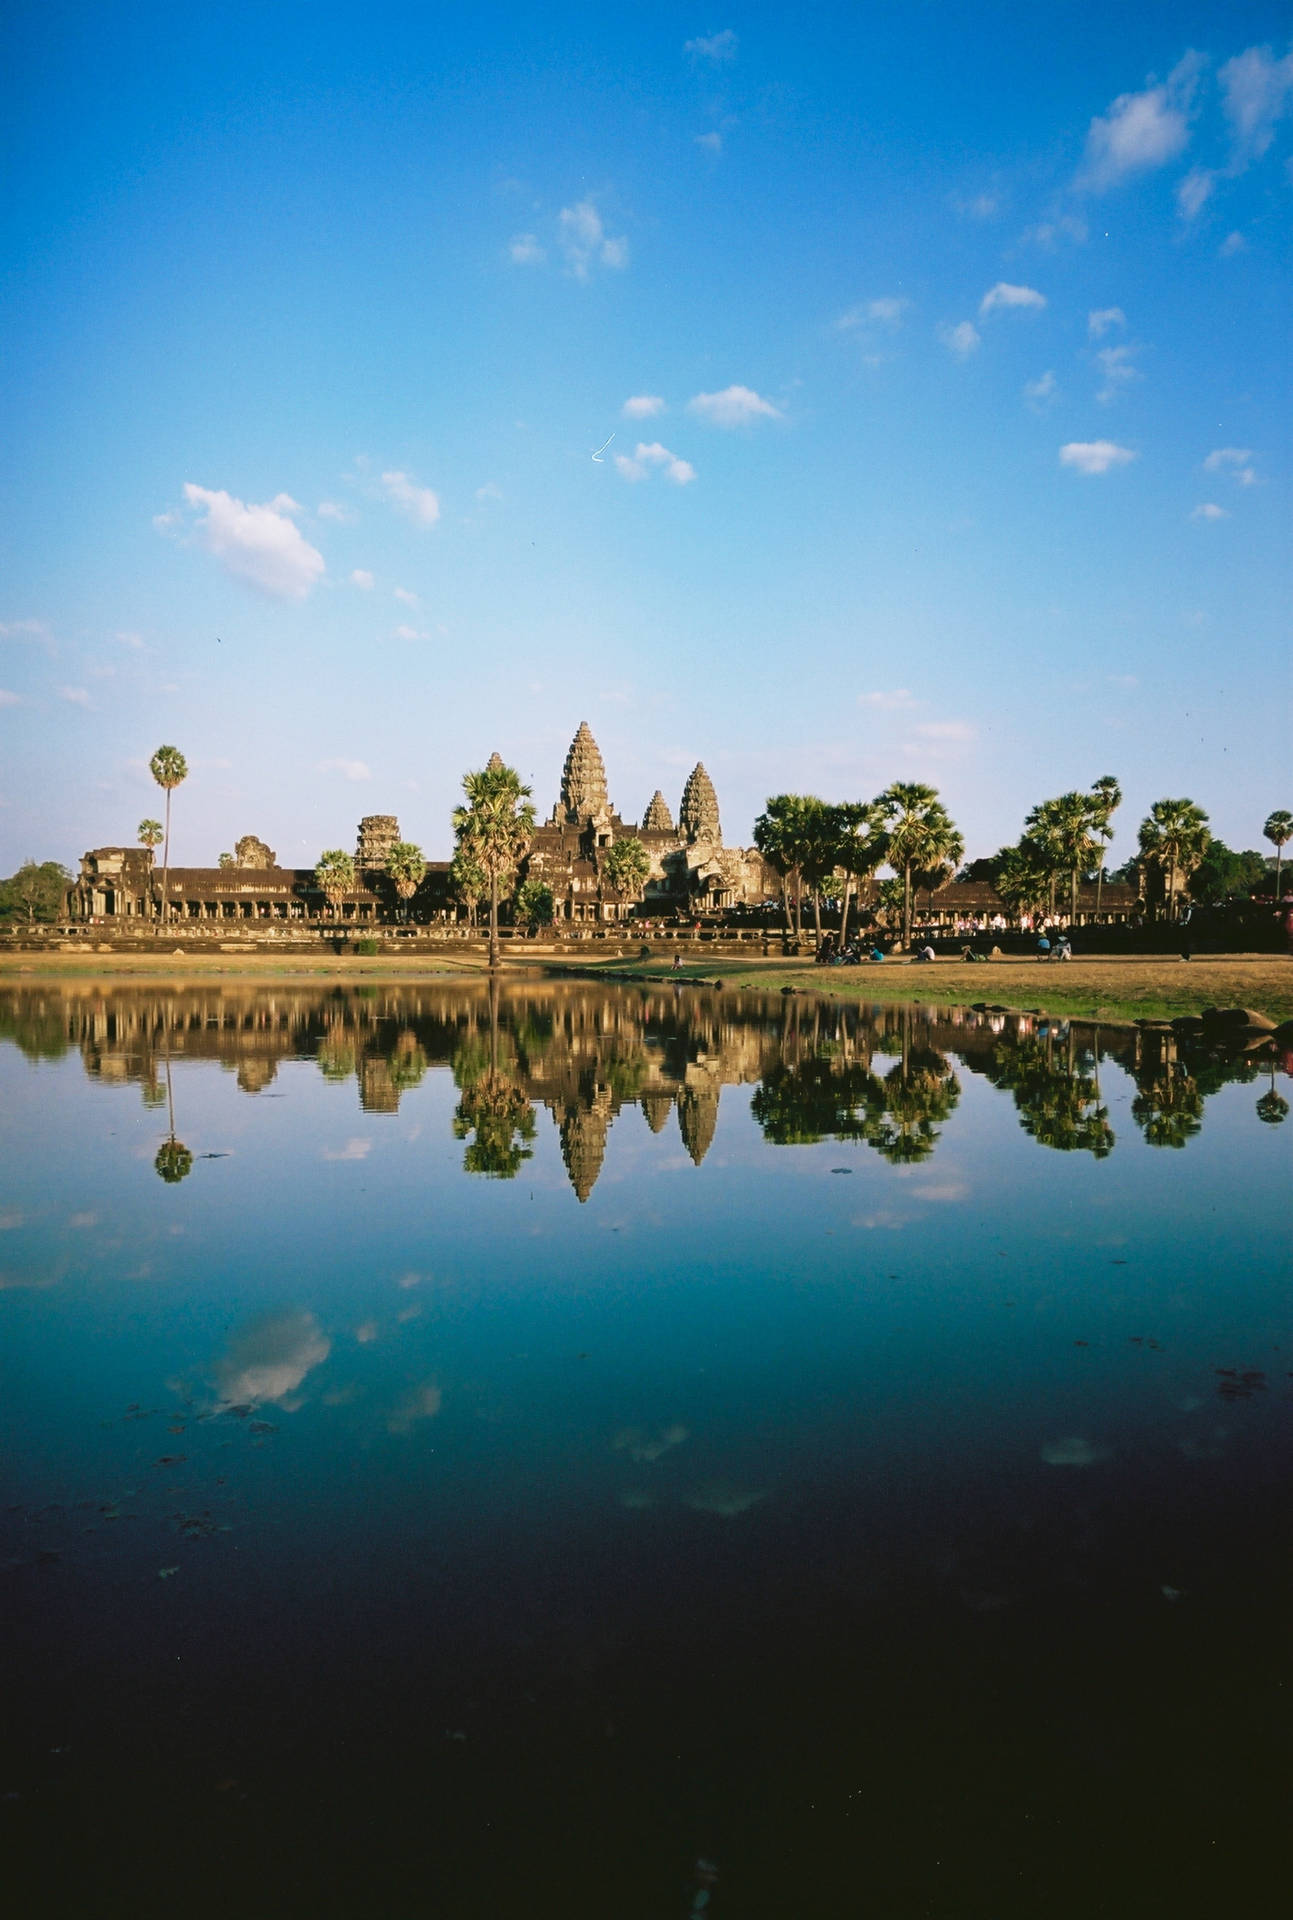 Angkor Wat Reflected In The Blue Water